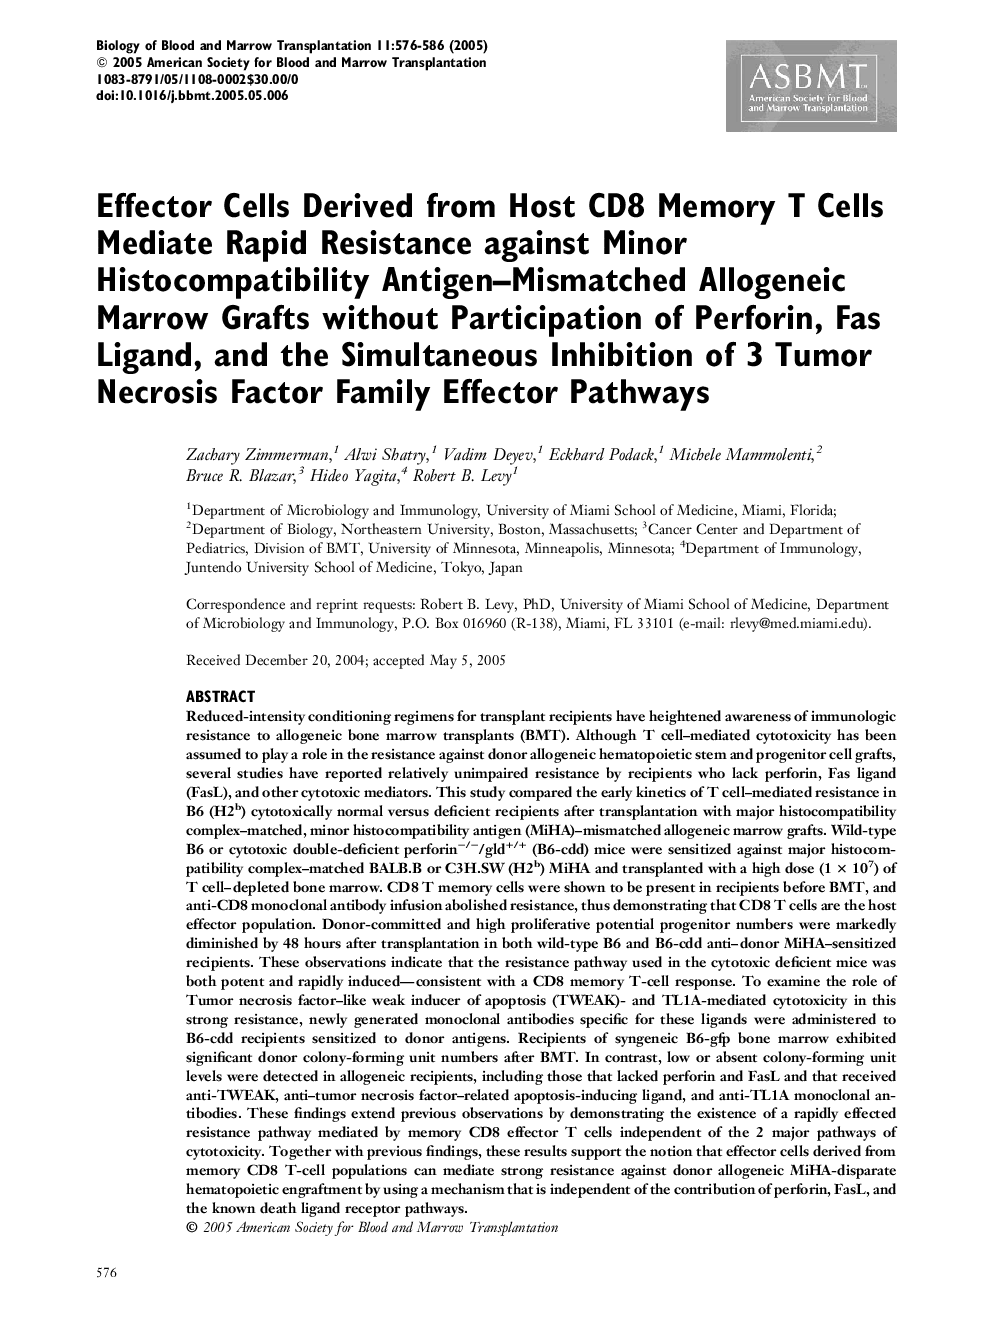 Effector Cells Derived from Host CD8 Memory T Cells Mediate Rapid Resistance against Minor Histocompatibility Antigen-Mismatched Allogeneic Marrow Grafts without Participation of Perforin, Fas Ligand, and the Simultaneous Inhibition of 3 Tumor Necrosis Fa